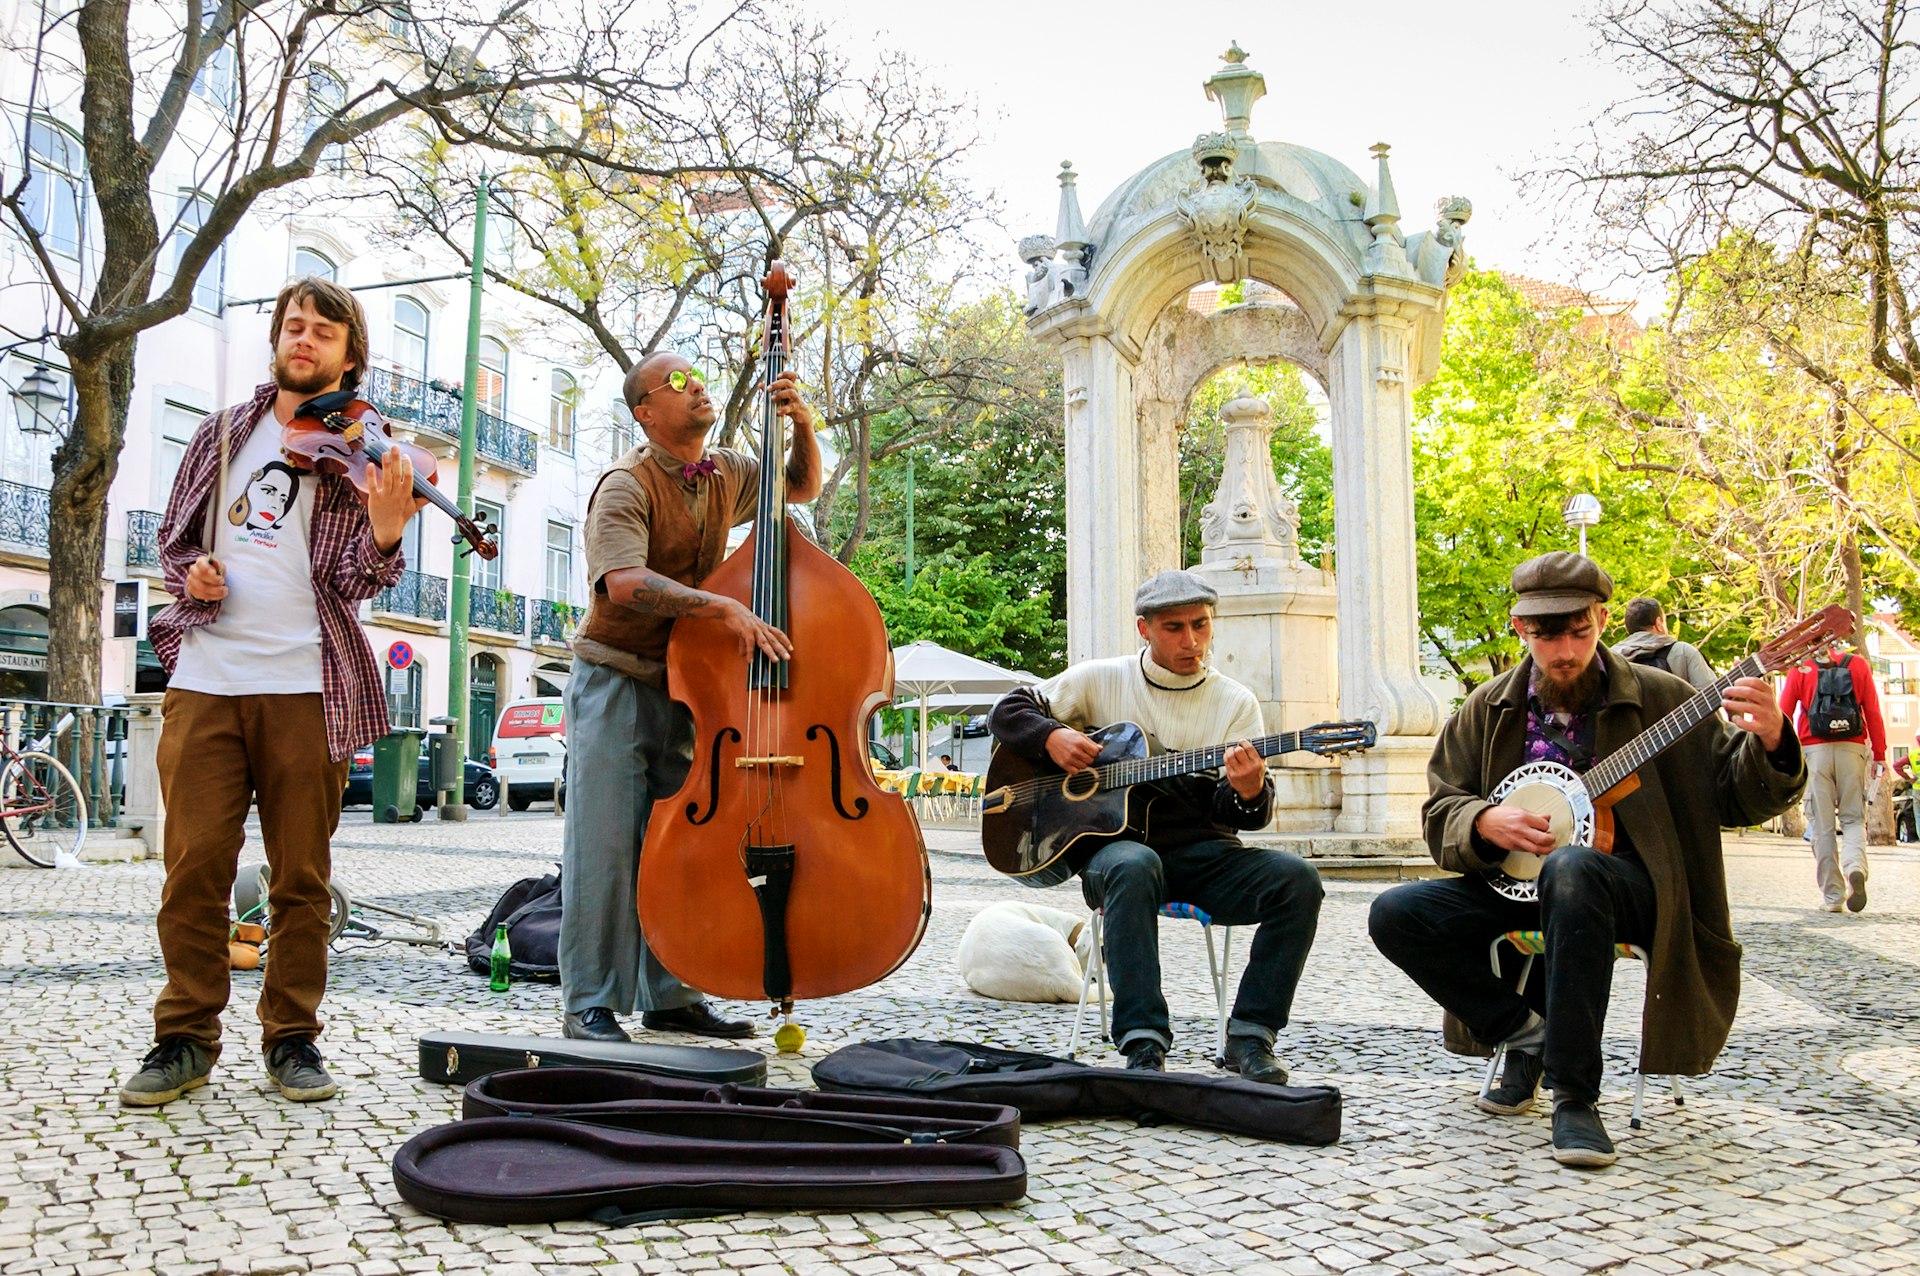 Four musicians play folk music in a public square in Lisbon